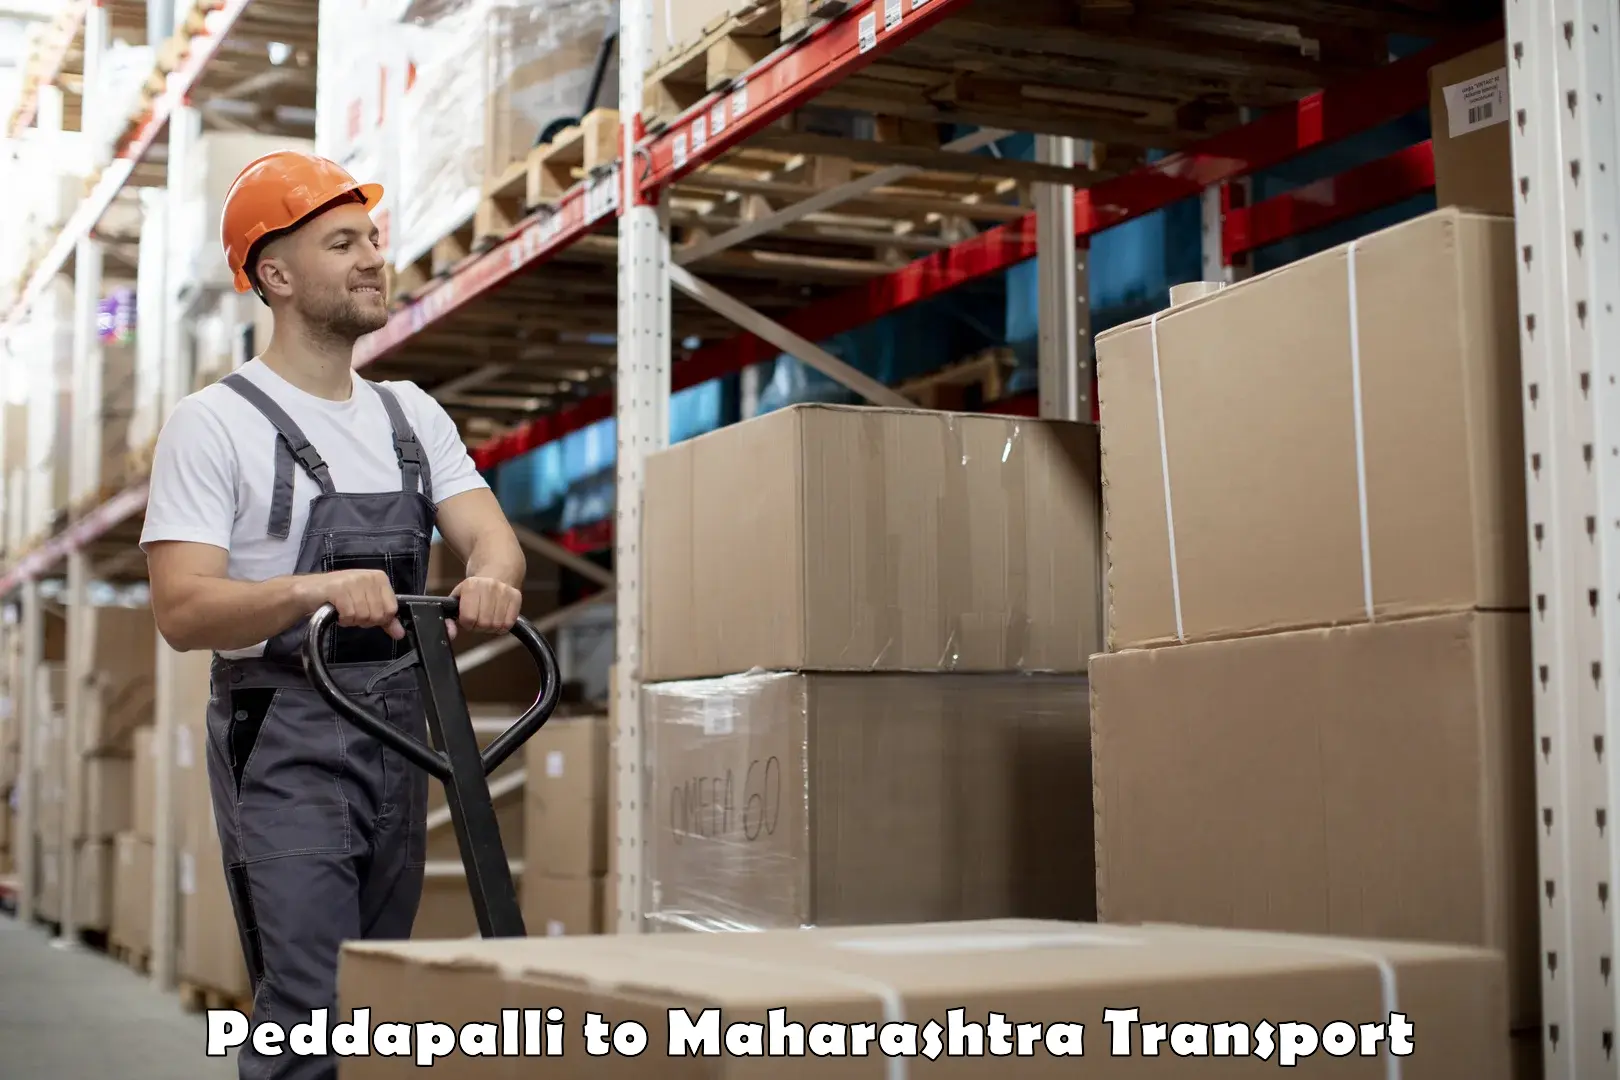 Truck transport companies in India Peddapalli to Vadgaon